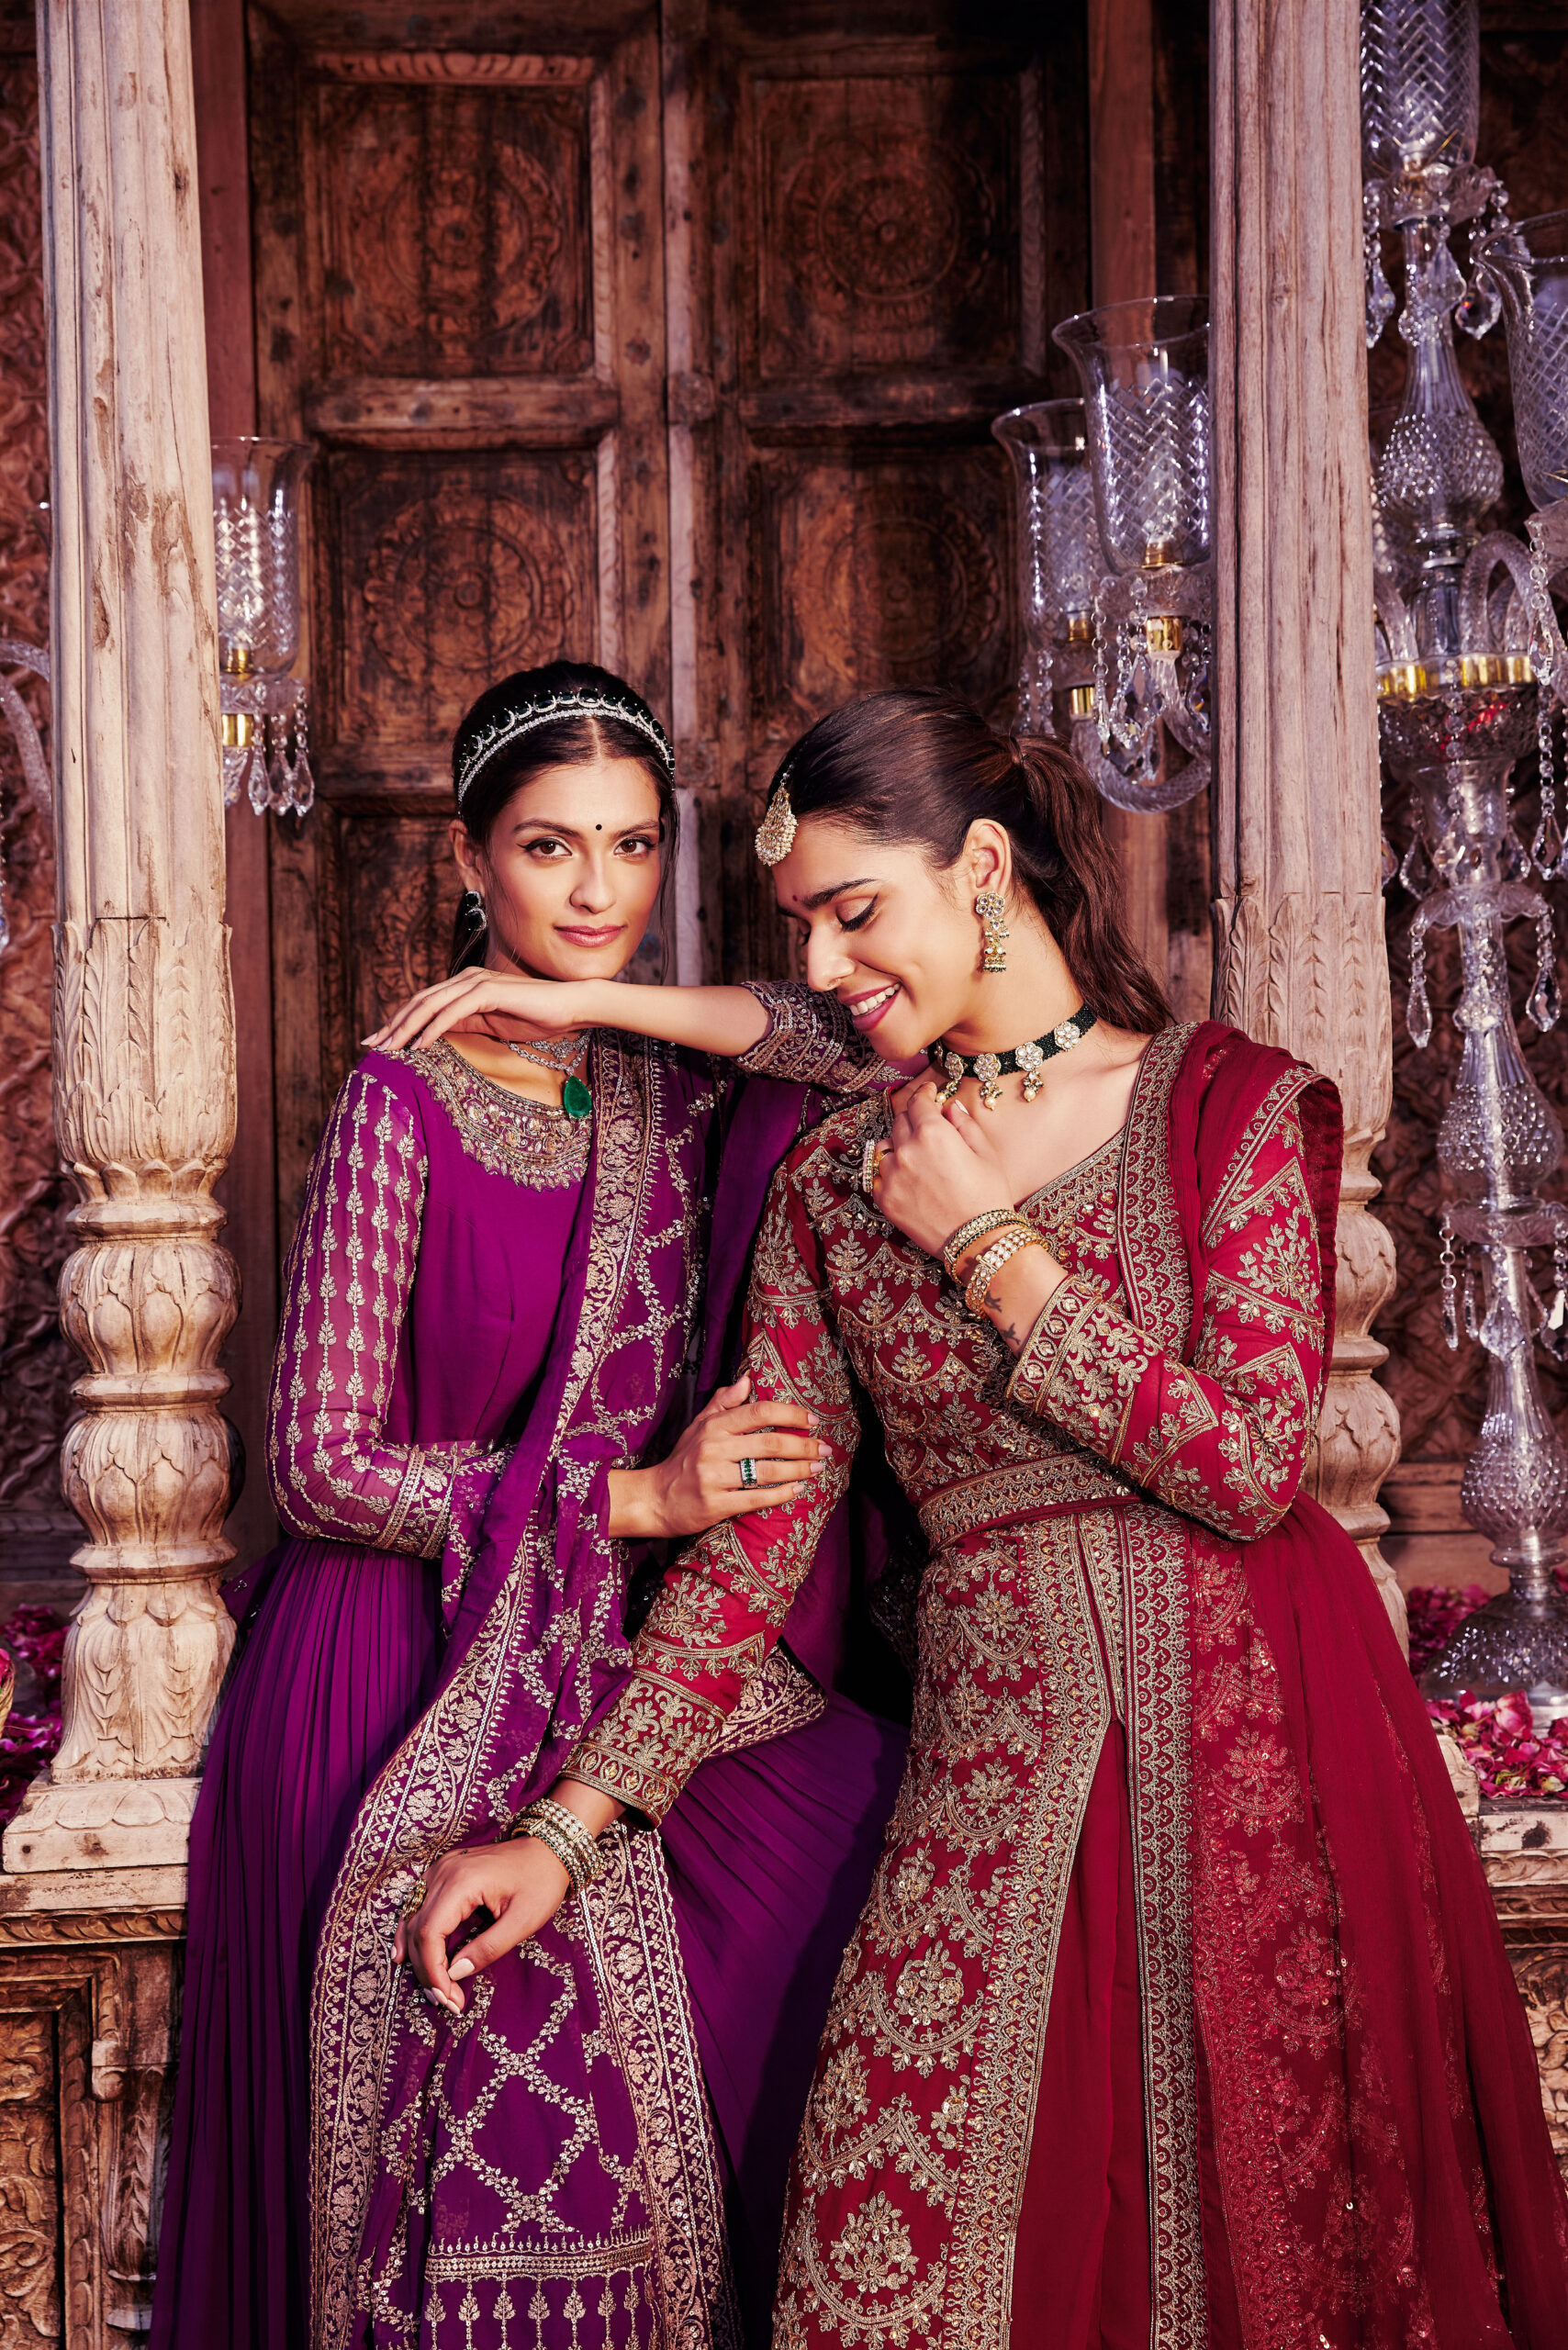 Indian Wedding Outfits to Leave a Lasting Impression